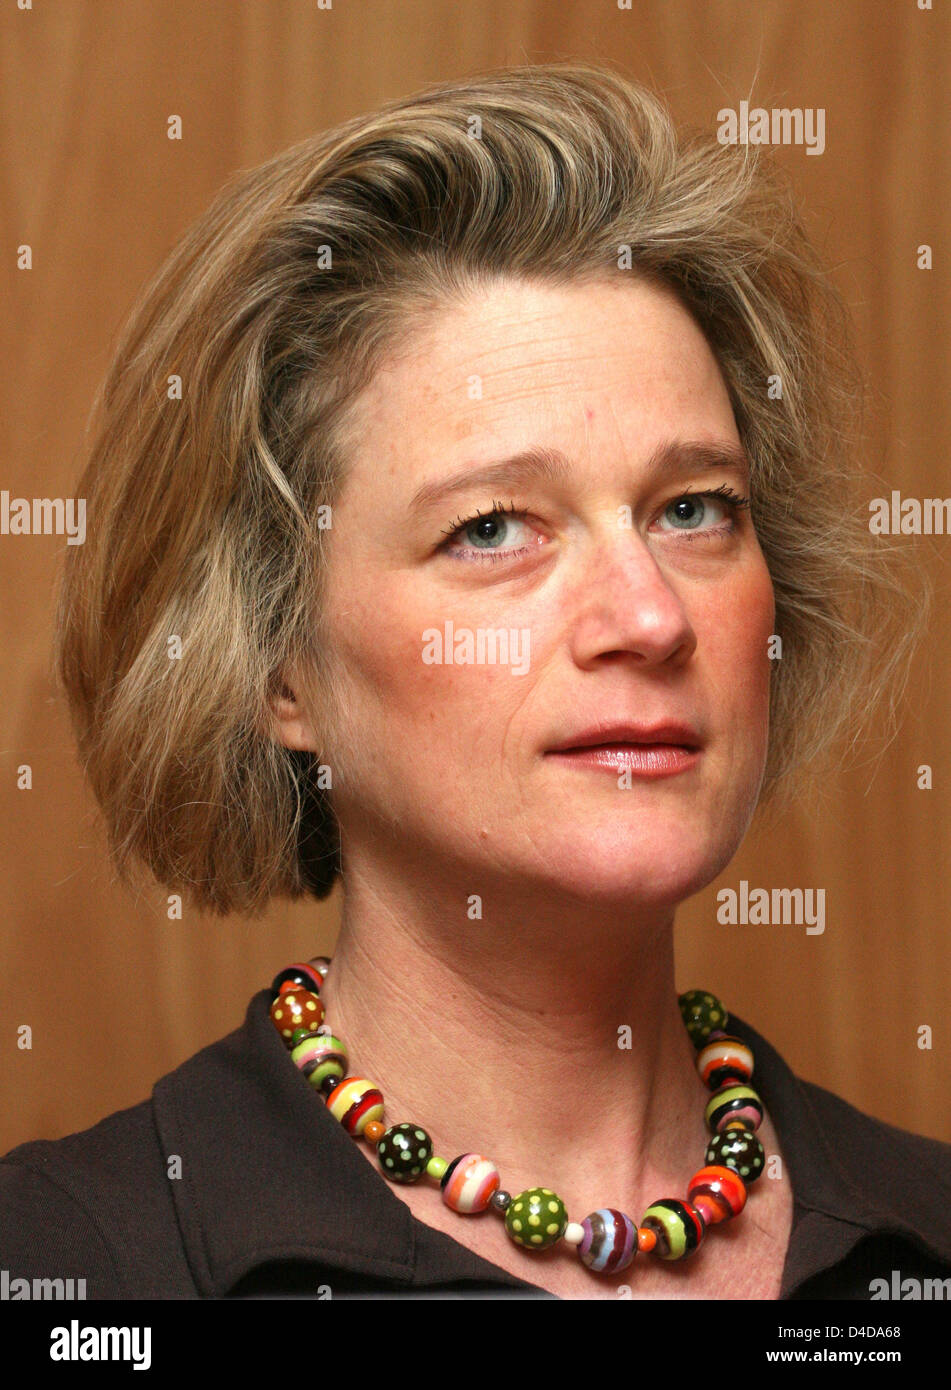 Delphine Boel is pictured during the presentation of her book 'De navelstreng doorknippen' ('To cut the umbilical cord') in Bruxelles, Belgium, 09 April 2008. She claims to be the daughter of Albert II of Belgium and Sybille, Baroness de Selys Longchamps. Although King Albert does not acknowledge her as his daughter, Boel's paternity link with the King is often reported as a fact b Stock Photo